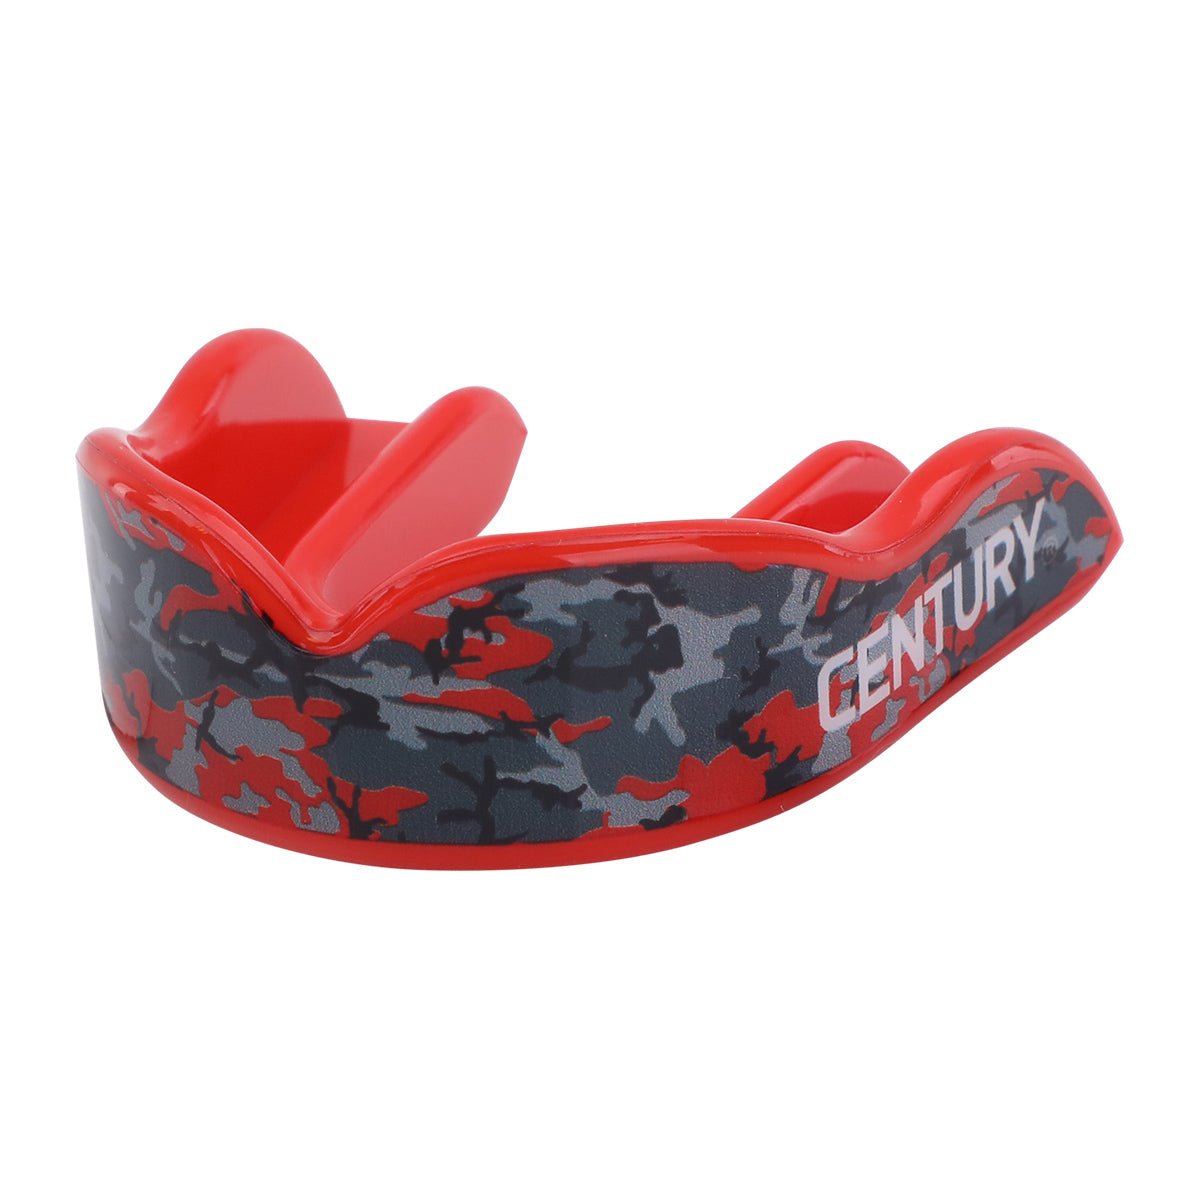 Warrior Mouthgaurd Youth Camo Red